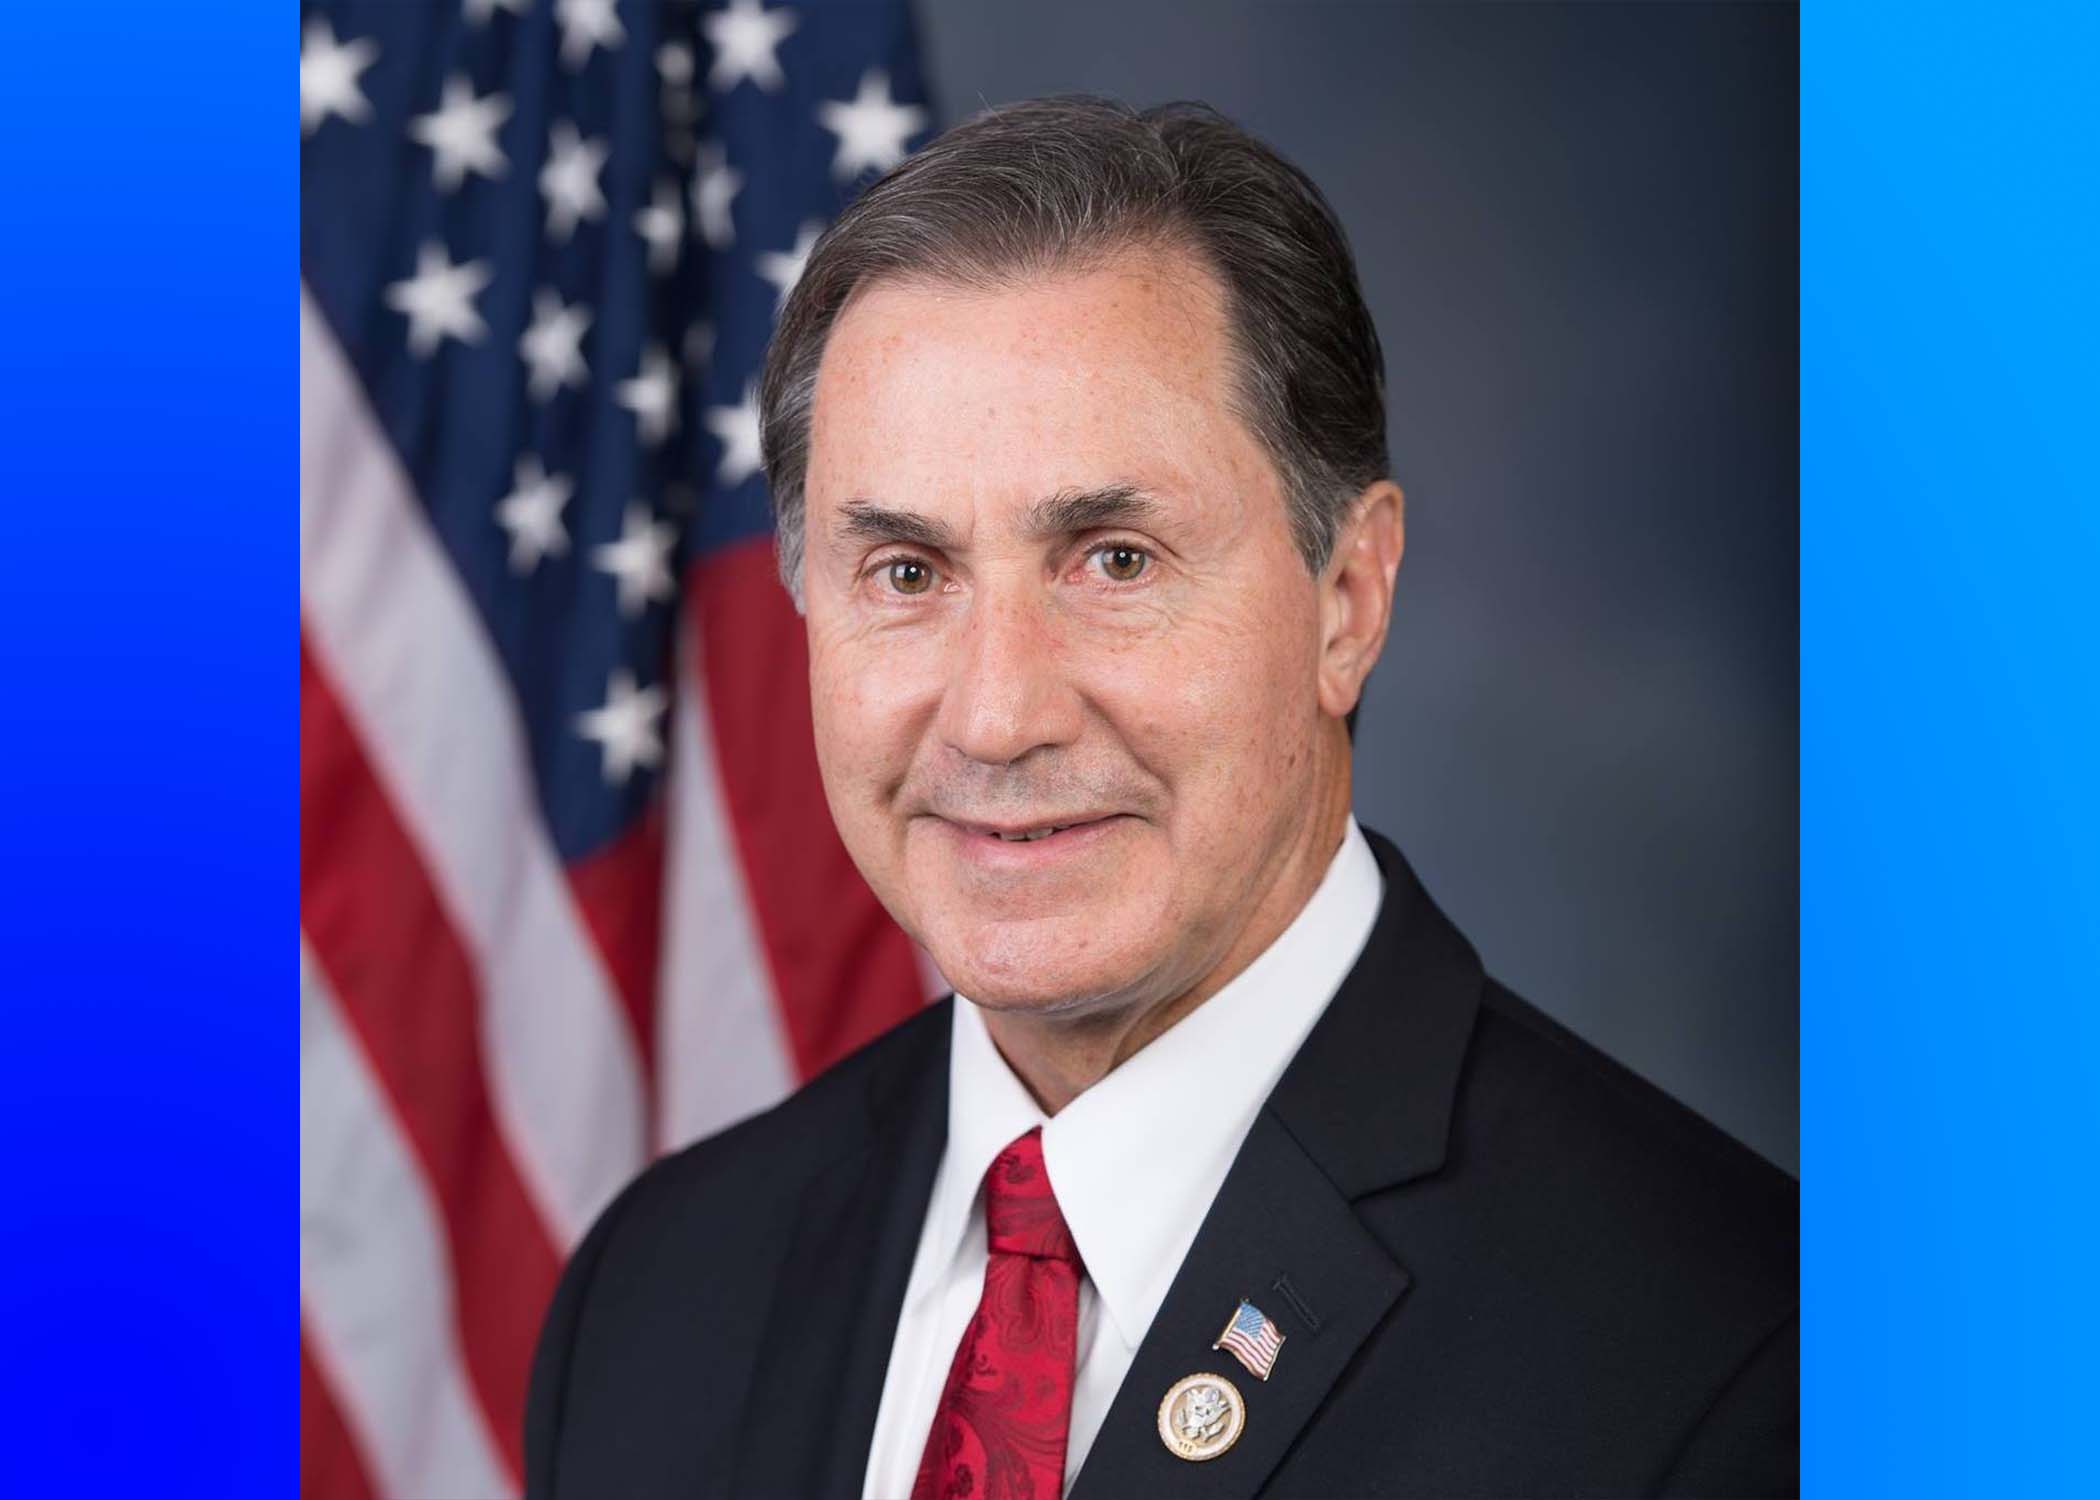 Congressman Gary Palmer to meet-and-greet the public Wednesday night at Trussville Civic Center